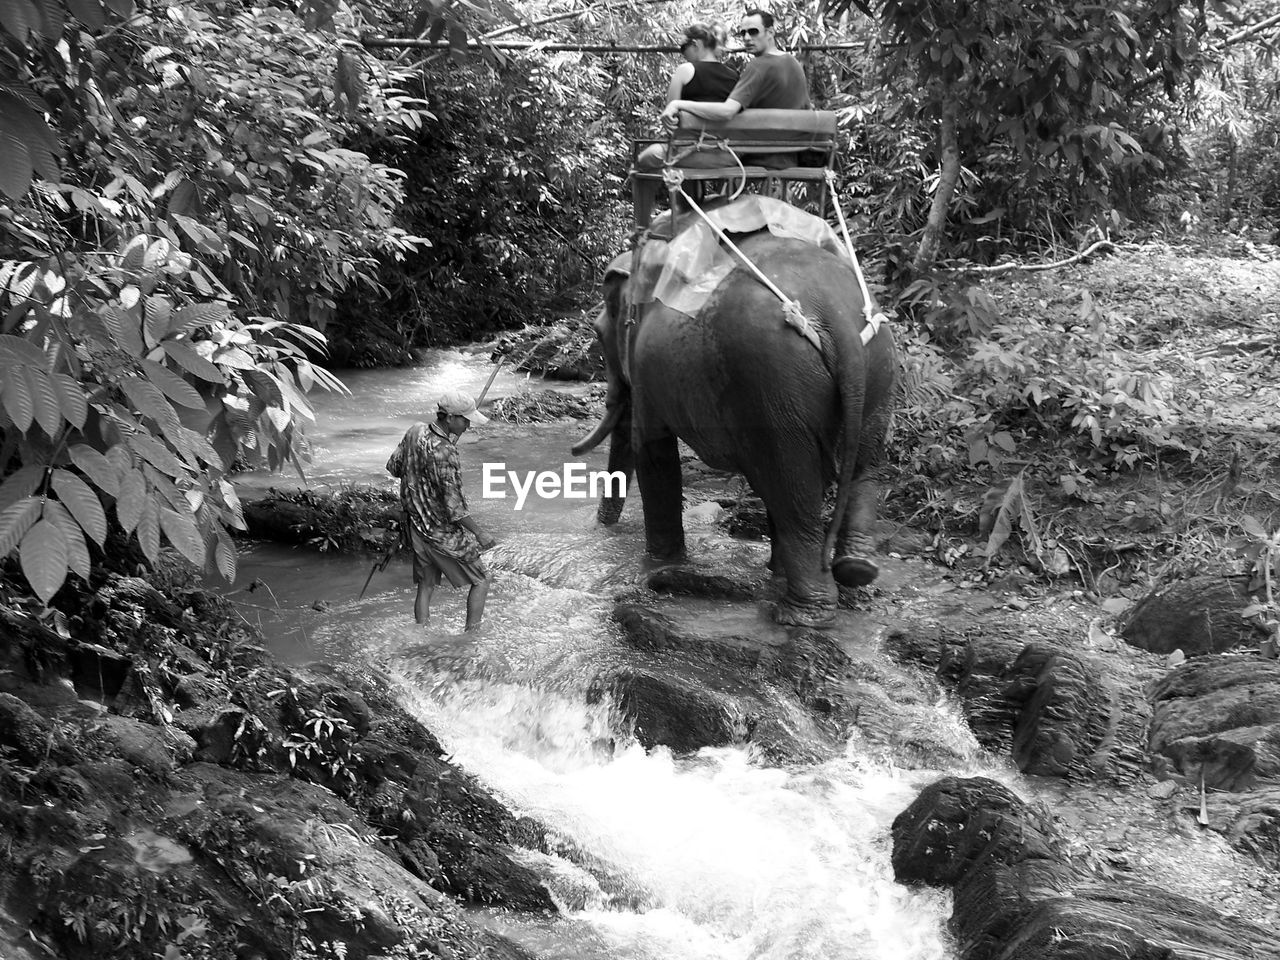 Rear view of people riding on elephant in forest